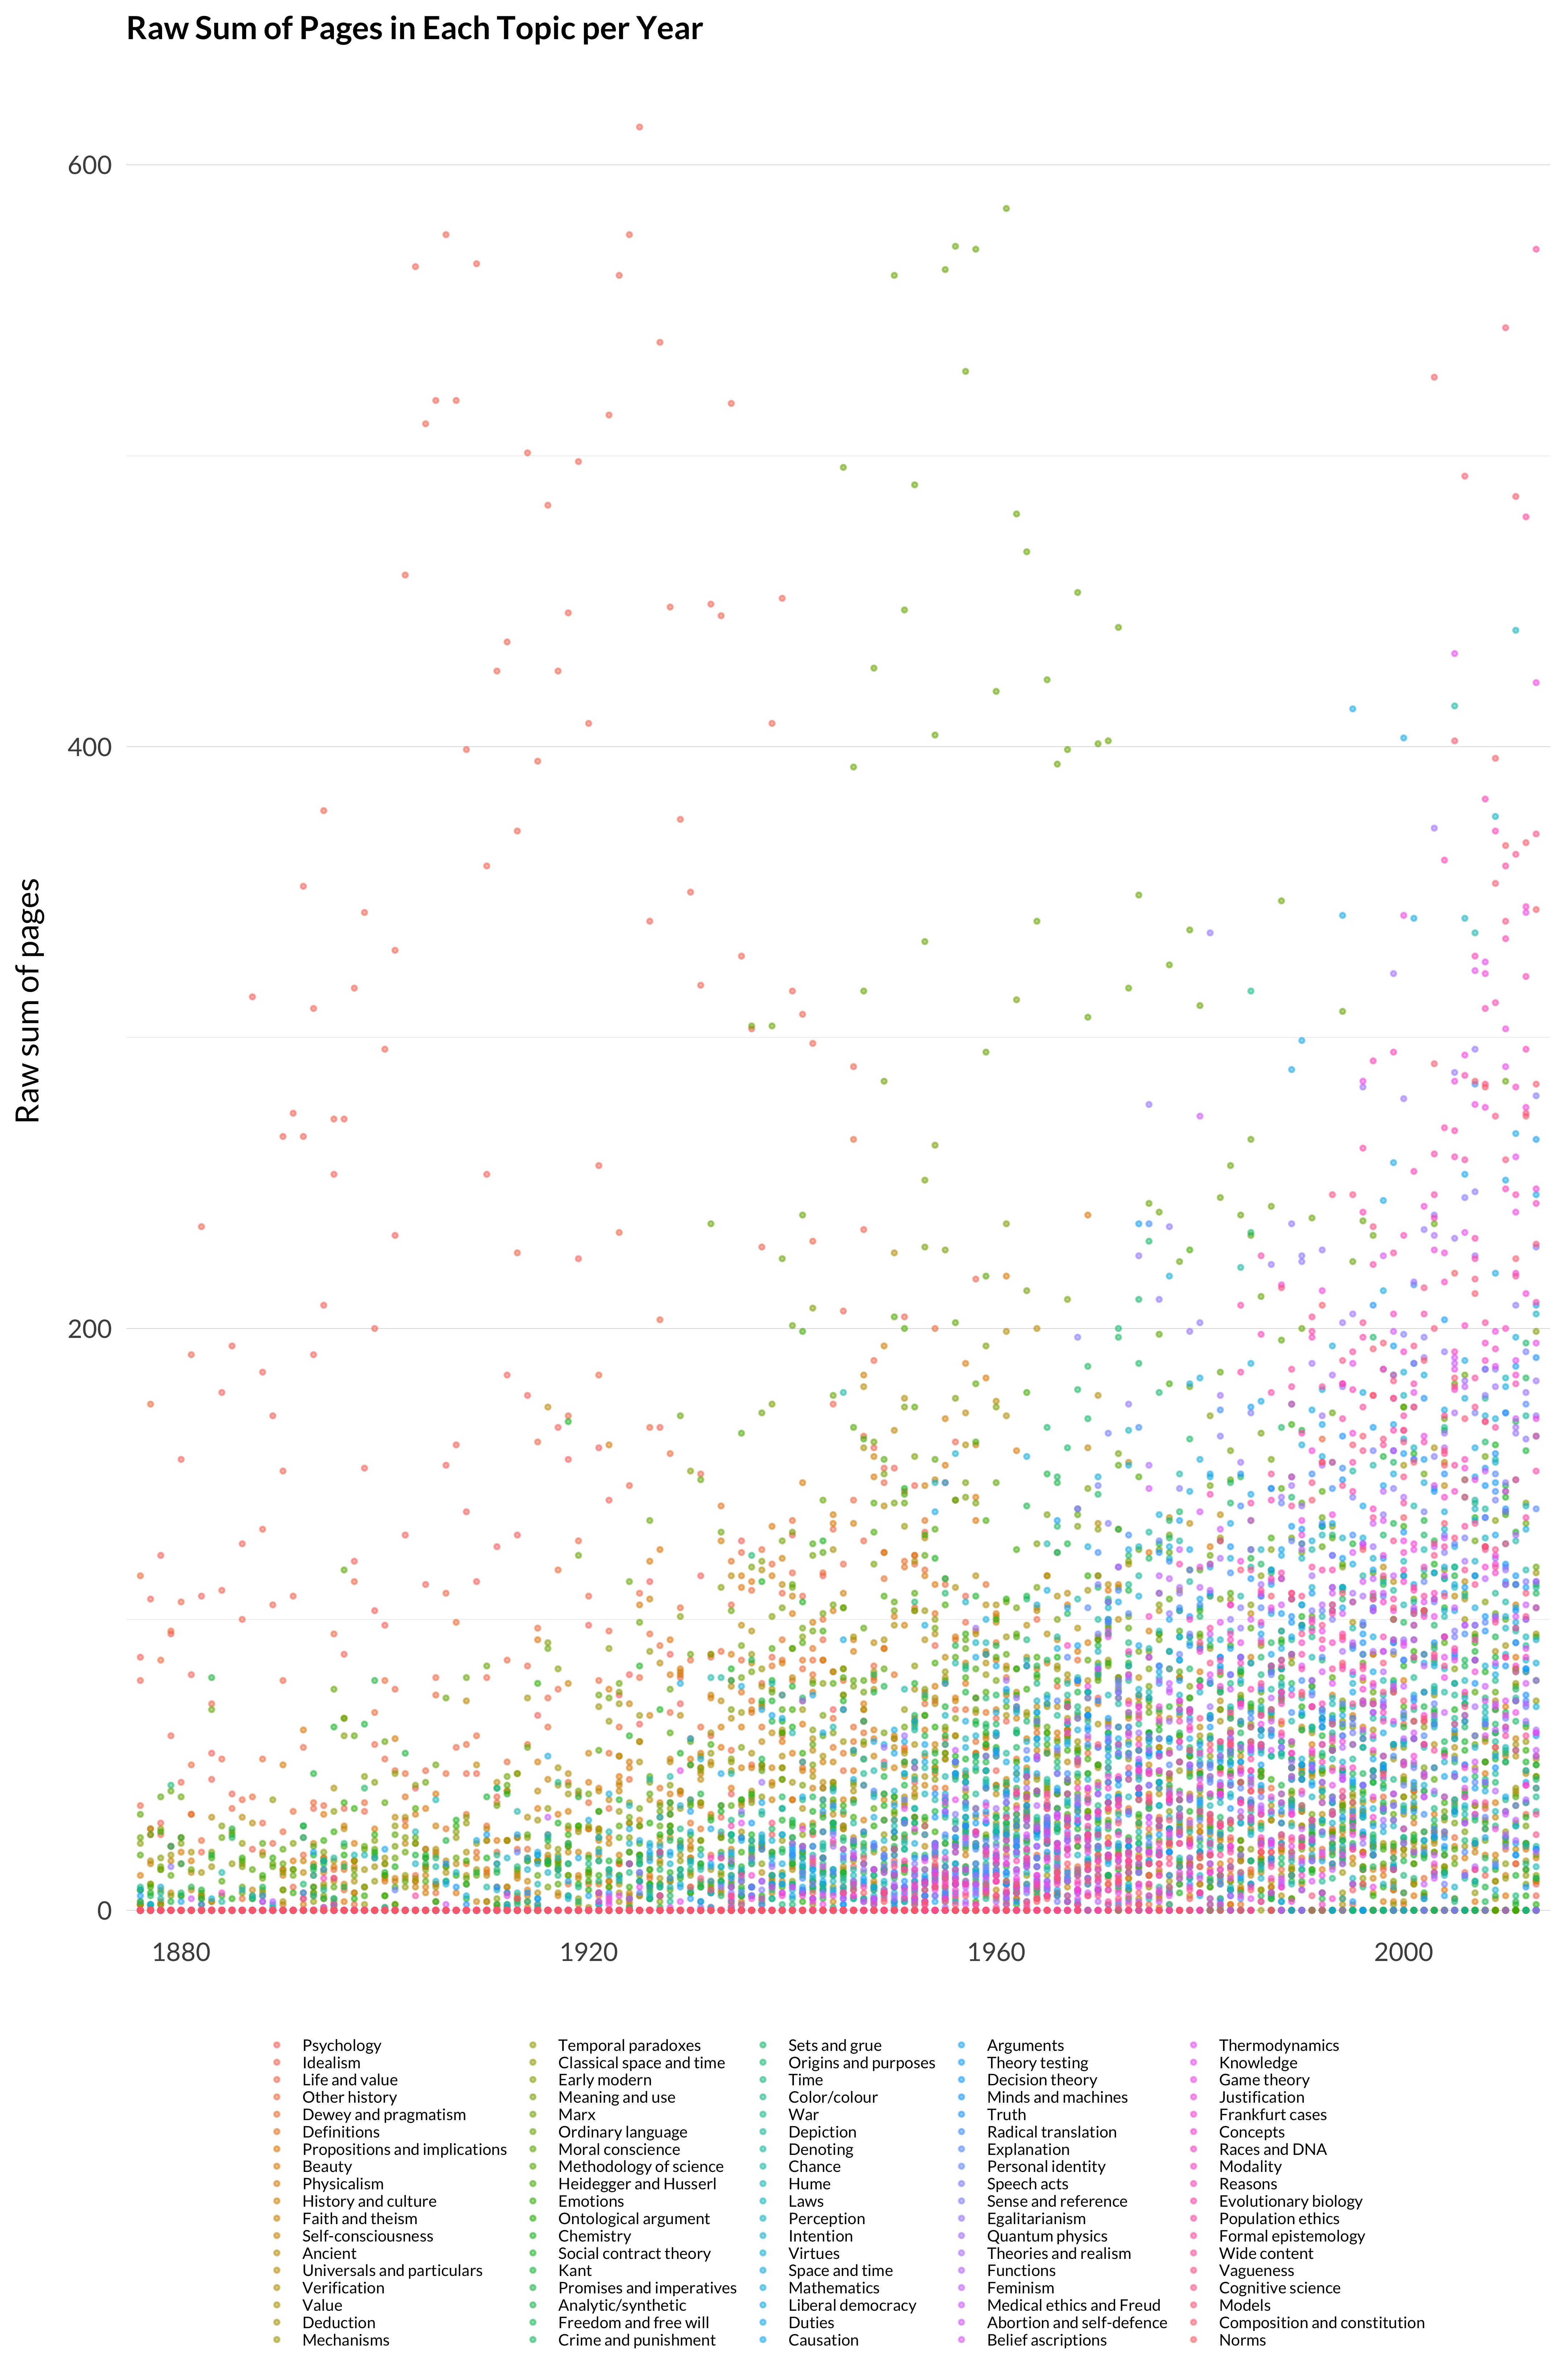 A plot showing the importance of all topics over time on a single graph, as measured by raw sum of pages. The underlying data is in Table B.6. It is mostly a mess of dots that doesn't show very much, but what information can be gleaned by looking is described in the text below.